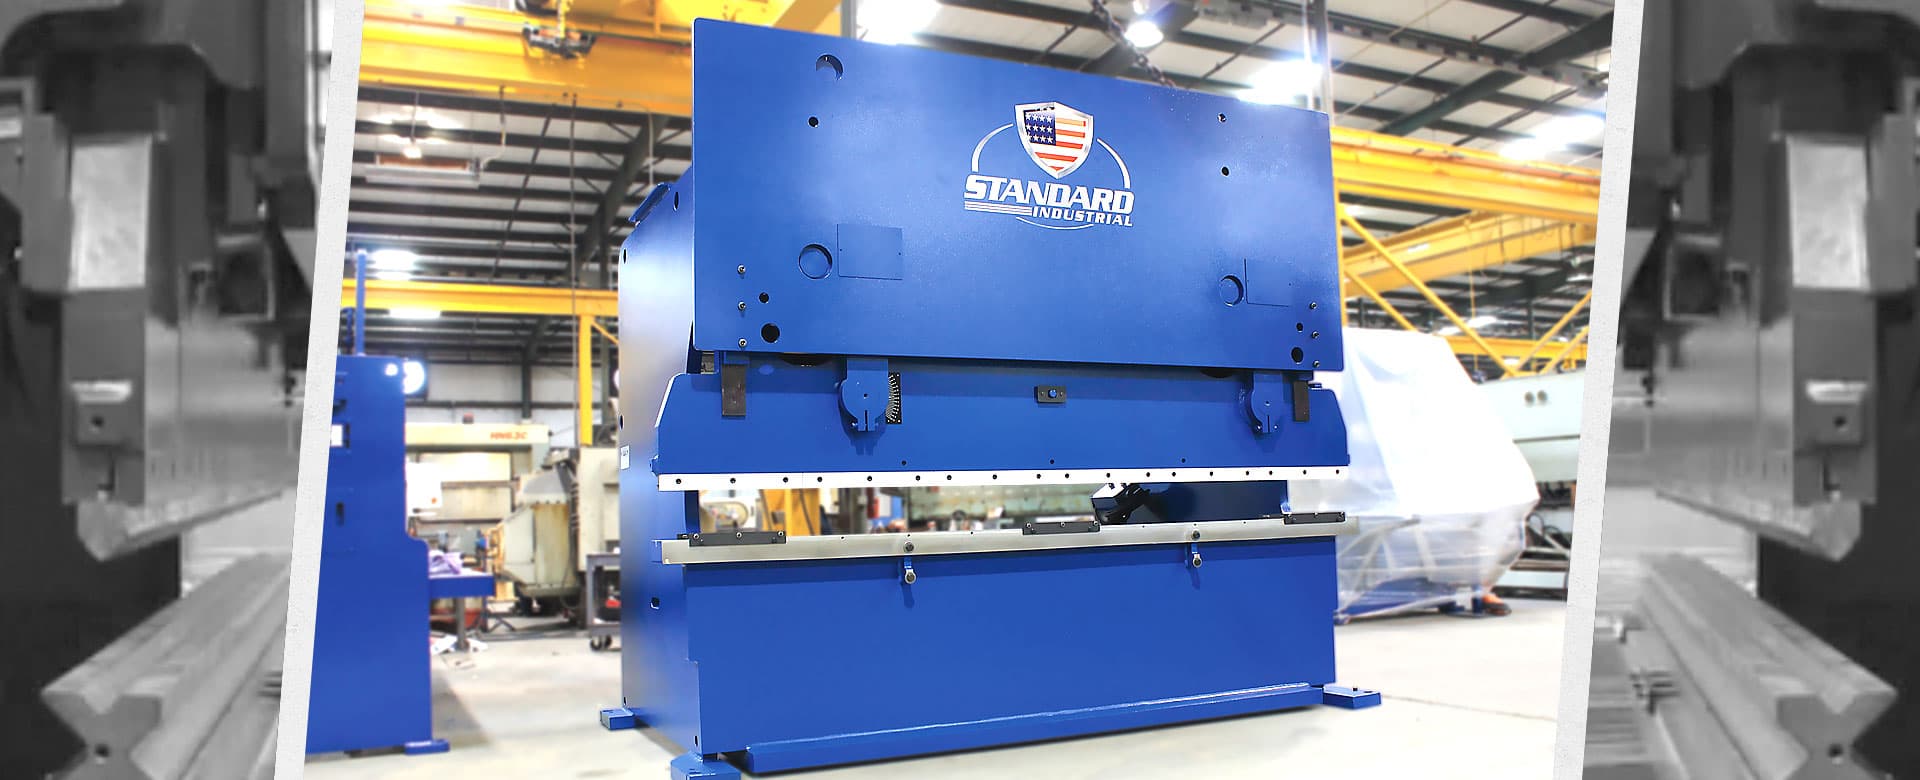 How much does a press brake cost